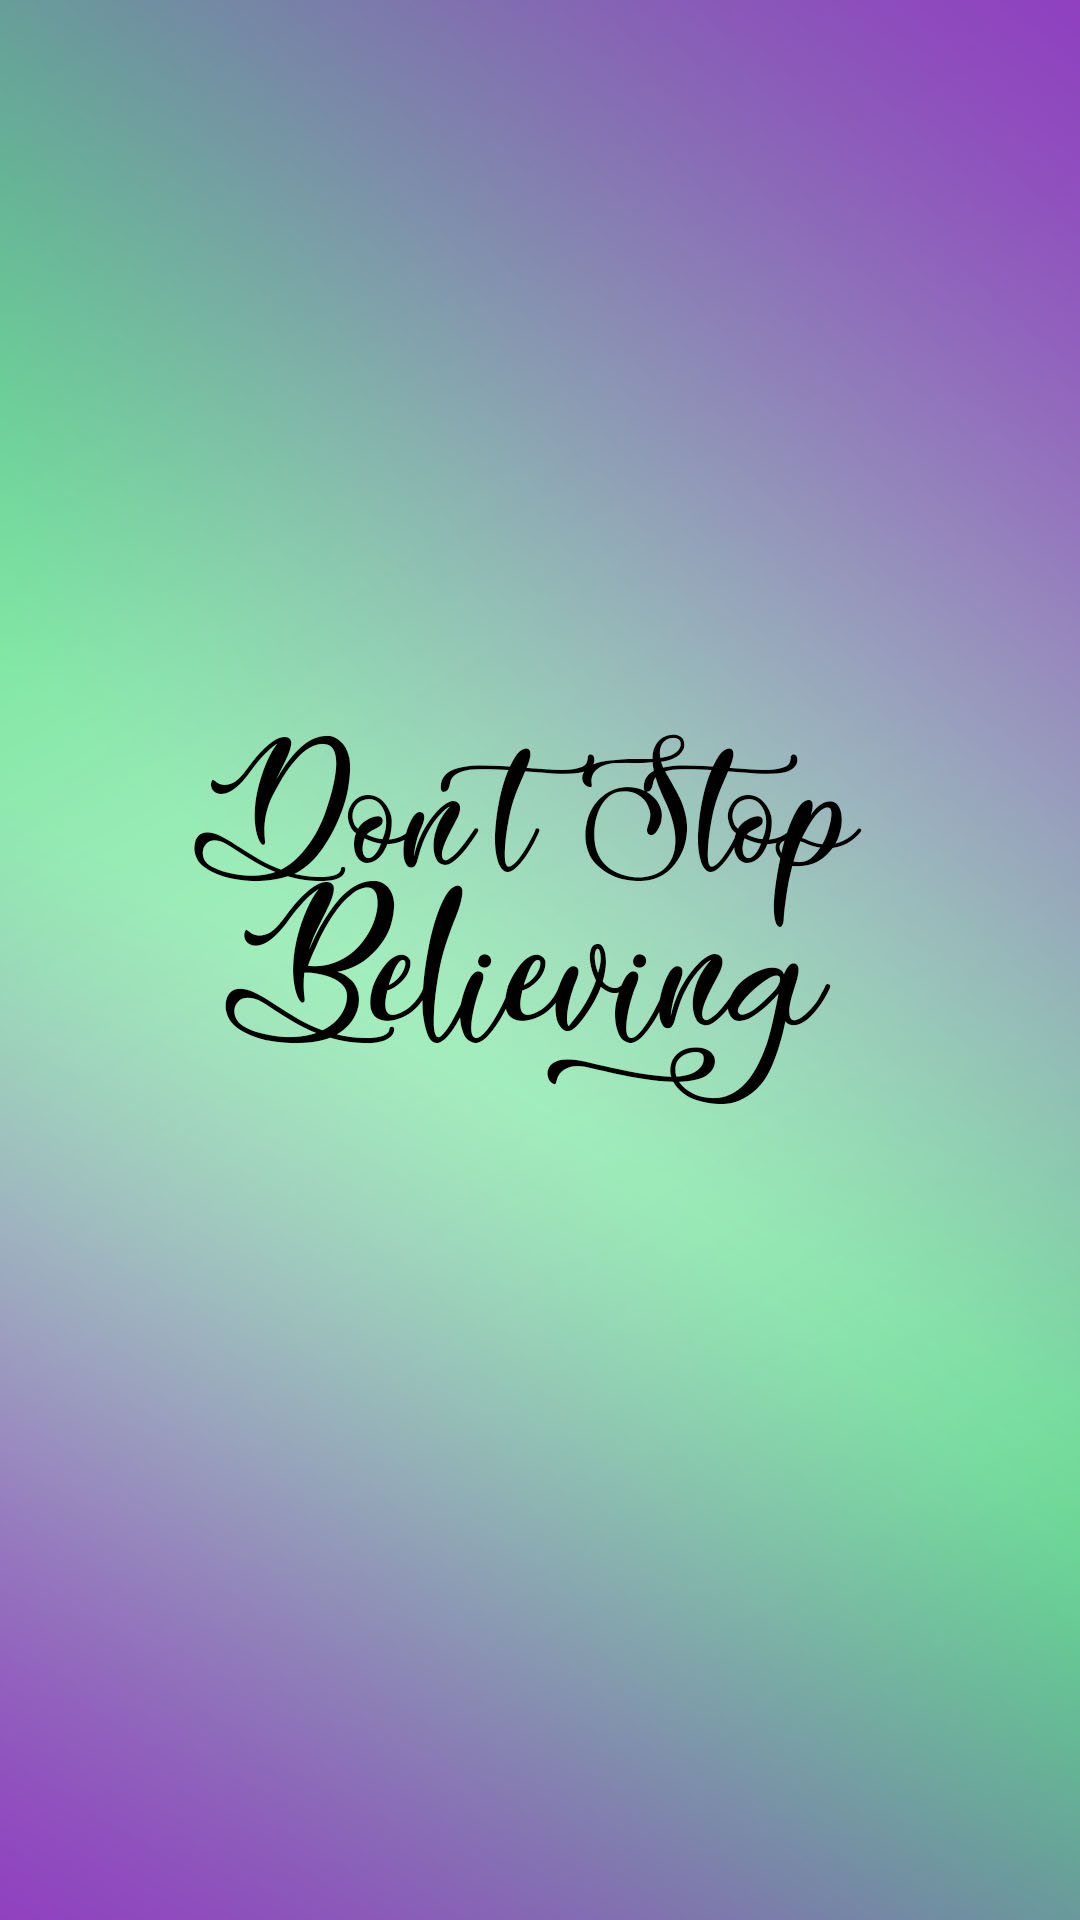 Don't Stop Believing by Imitation